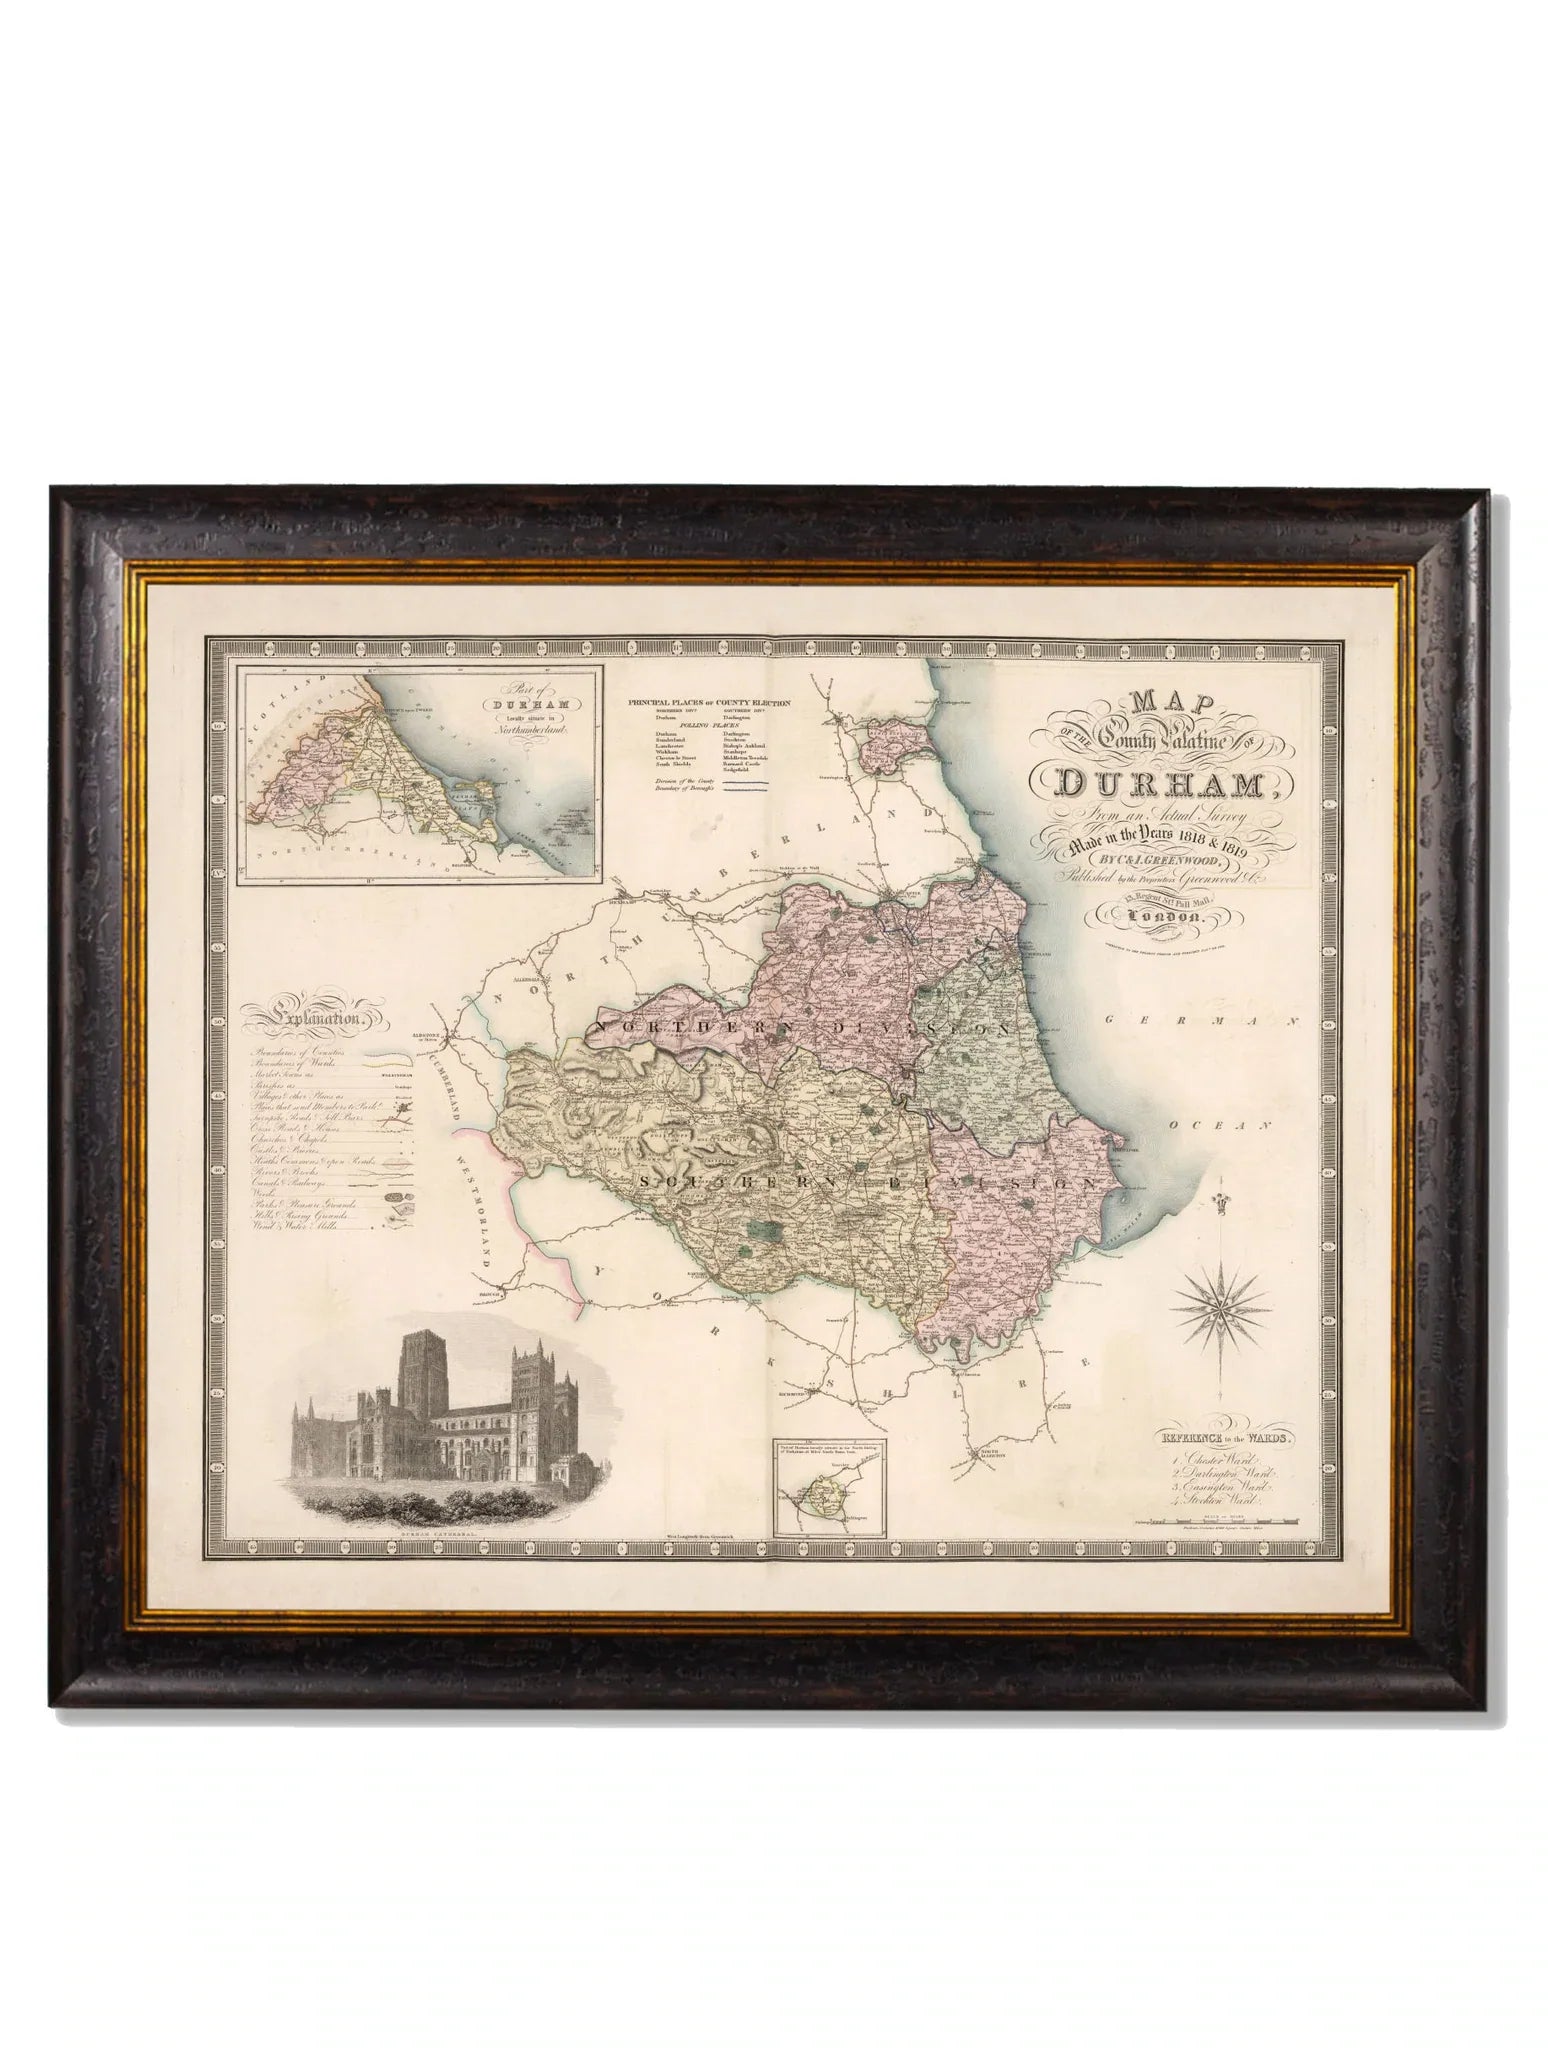 C.1830 County Maps Of England Frames for sale - Woodcock and Cavendish